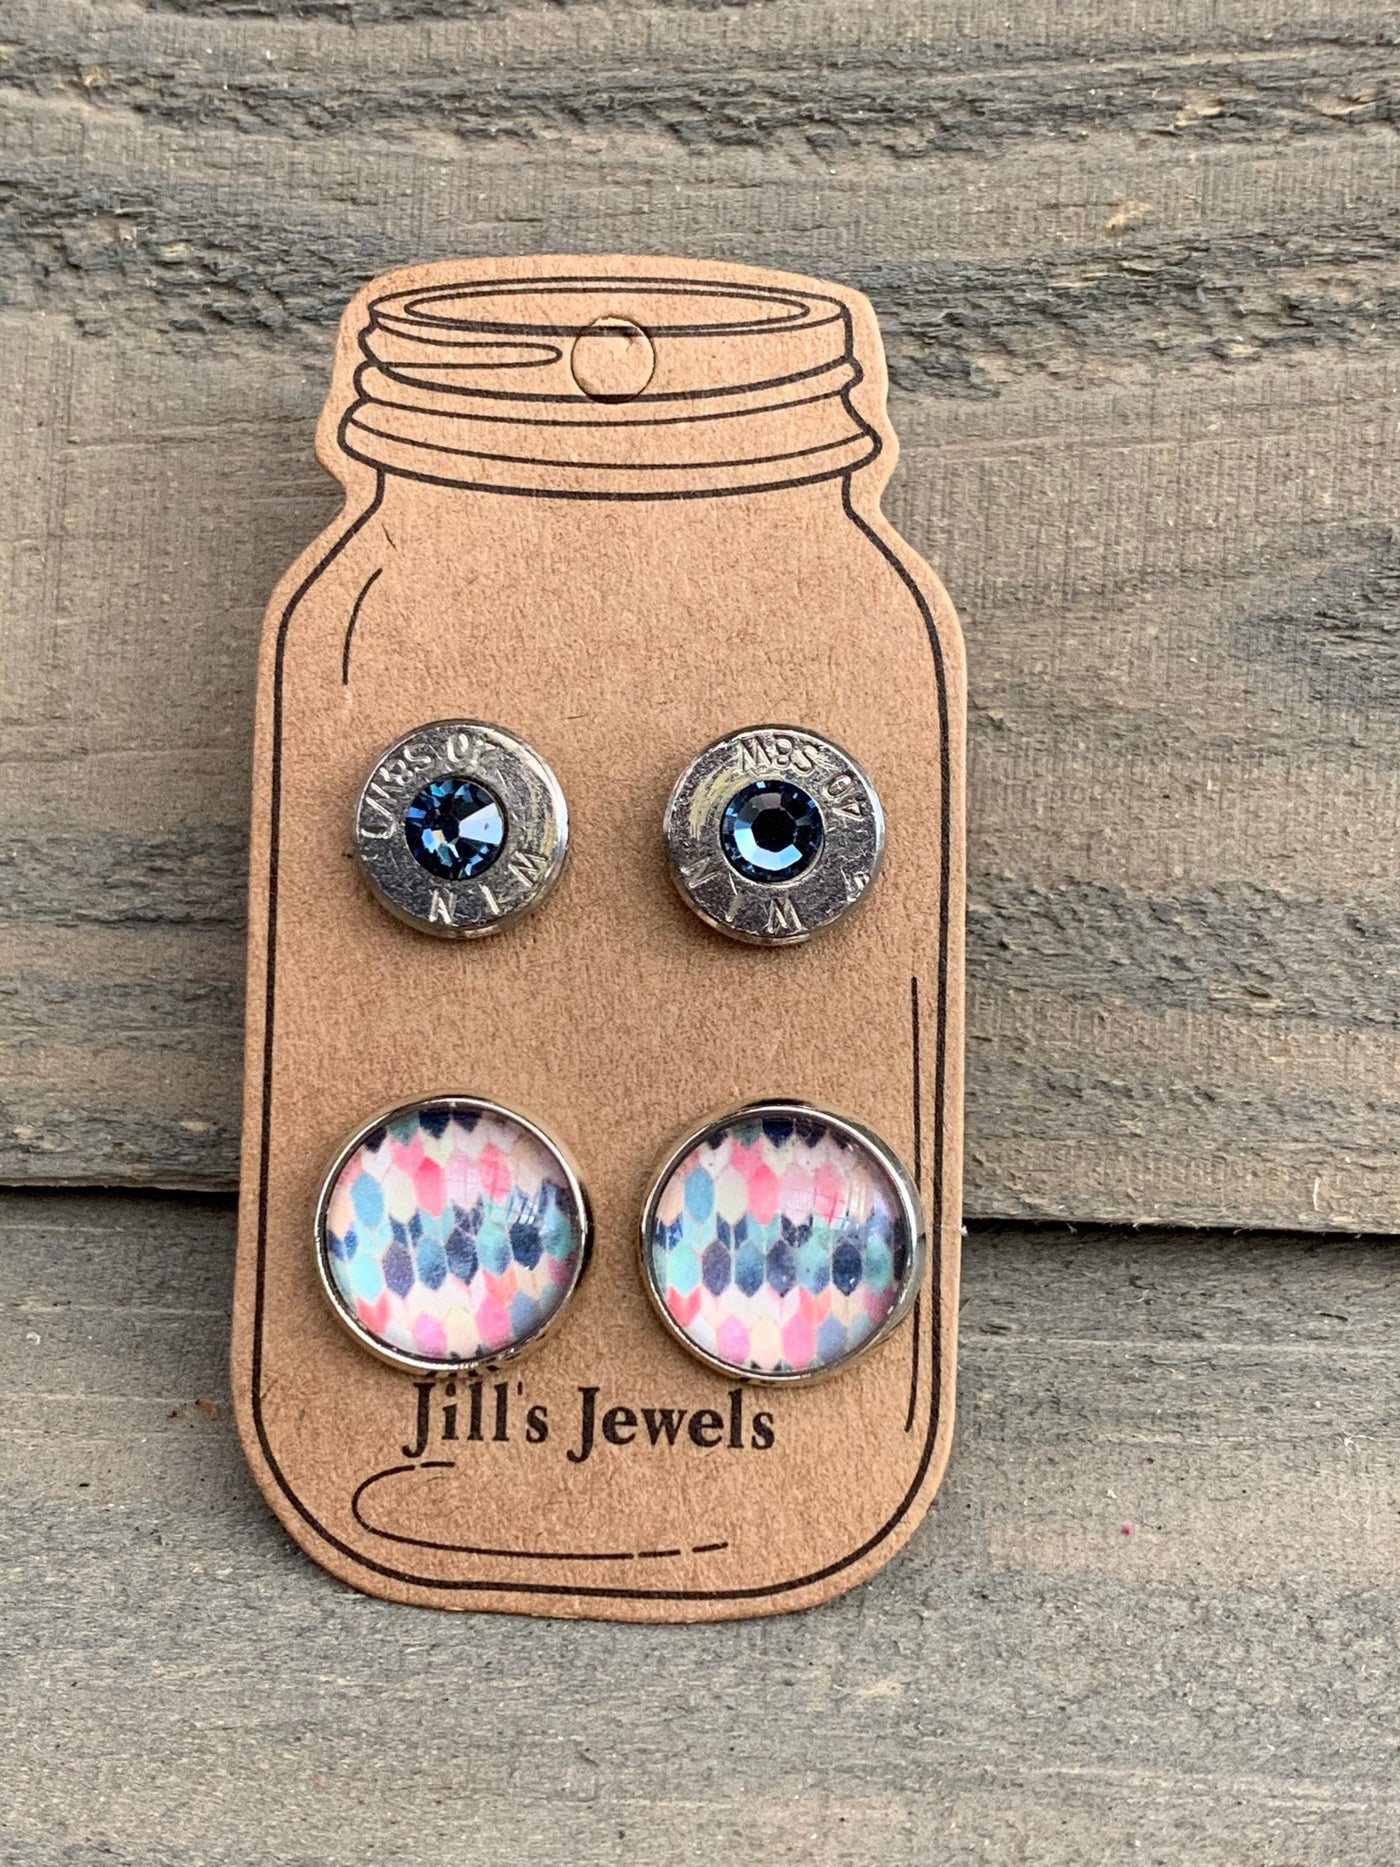 Blue and Pink Geometric 40 Caliber bullet earring set - Jill's Jewels | Unique, Handcrafted, Trendy, And Fun Jewelry